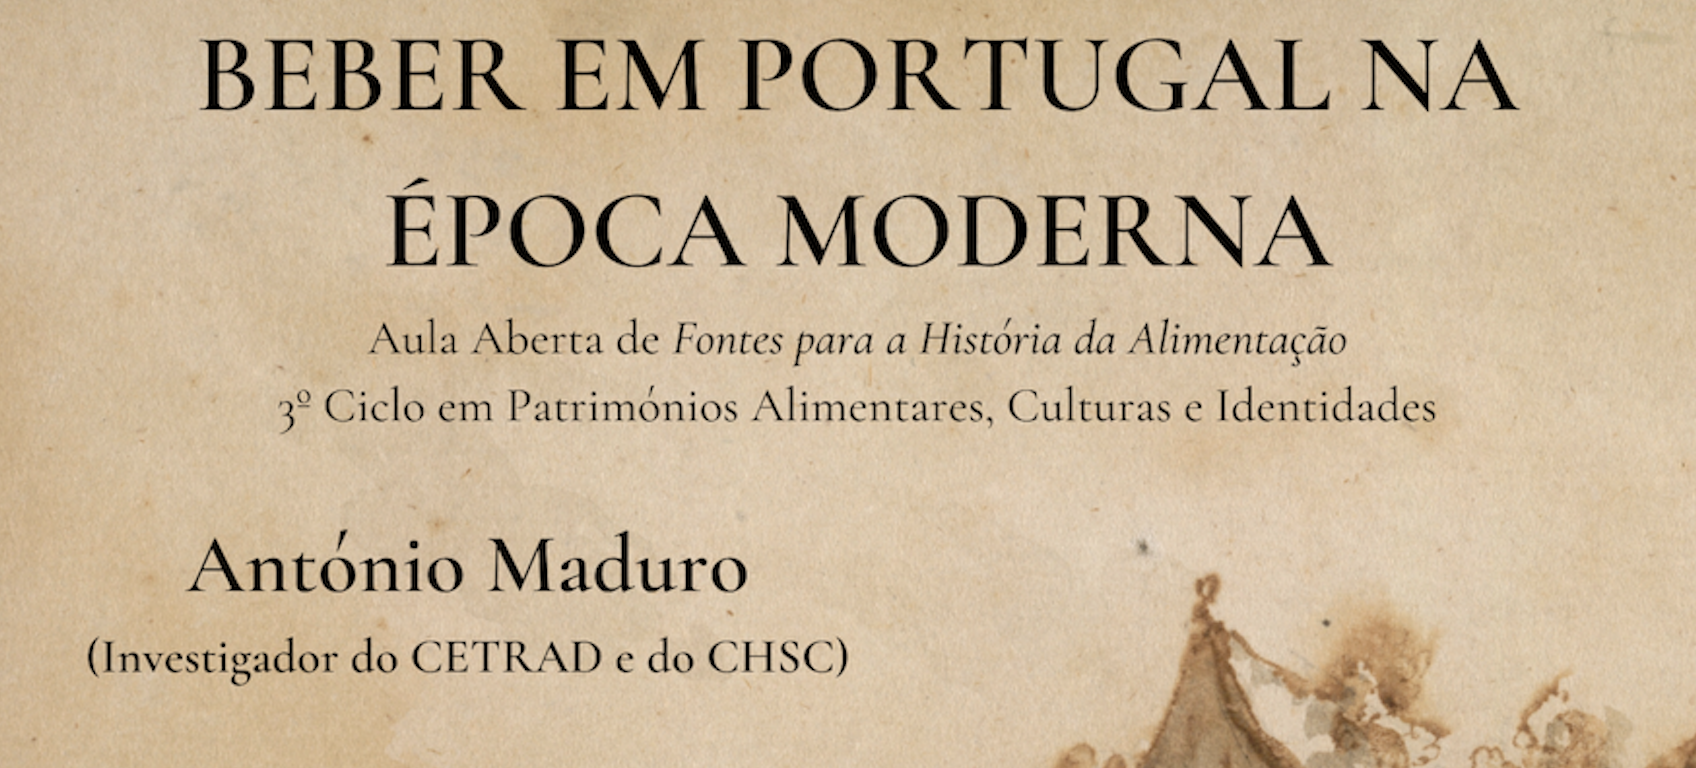 Conference by António Maduro: Drinking in Portugal in the Modern Age